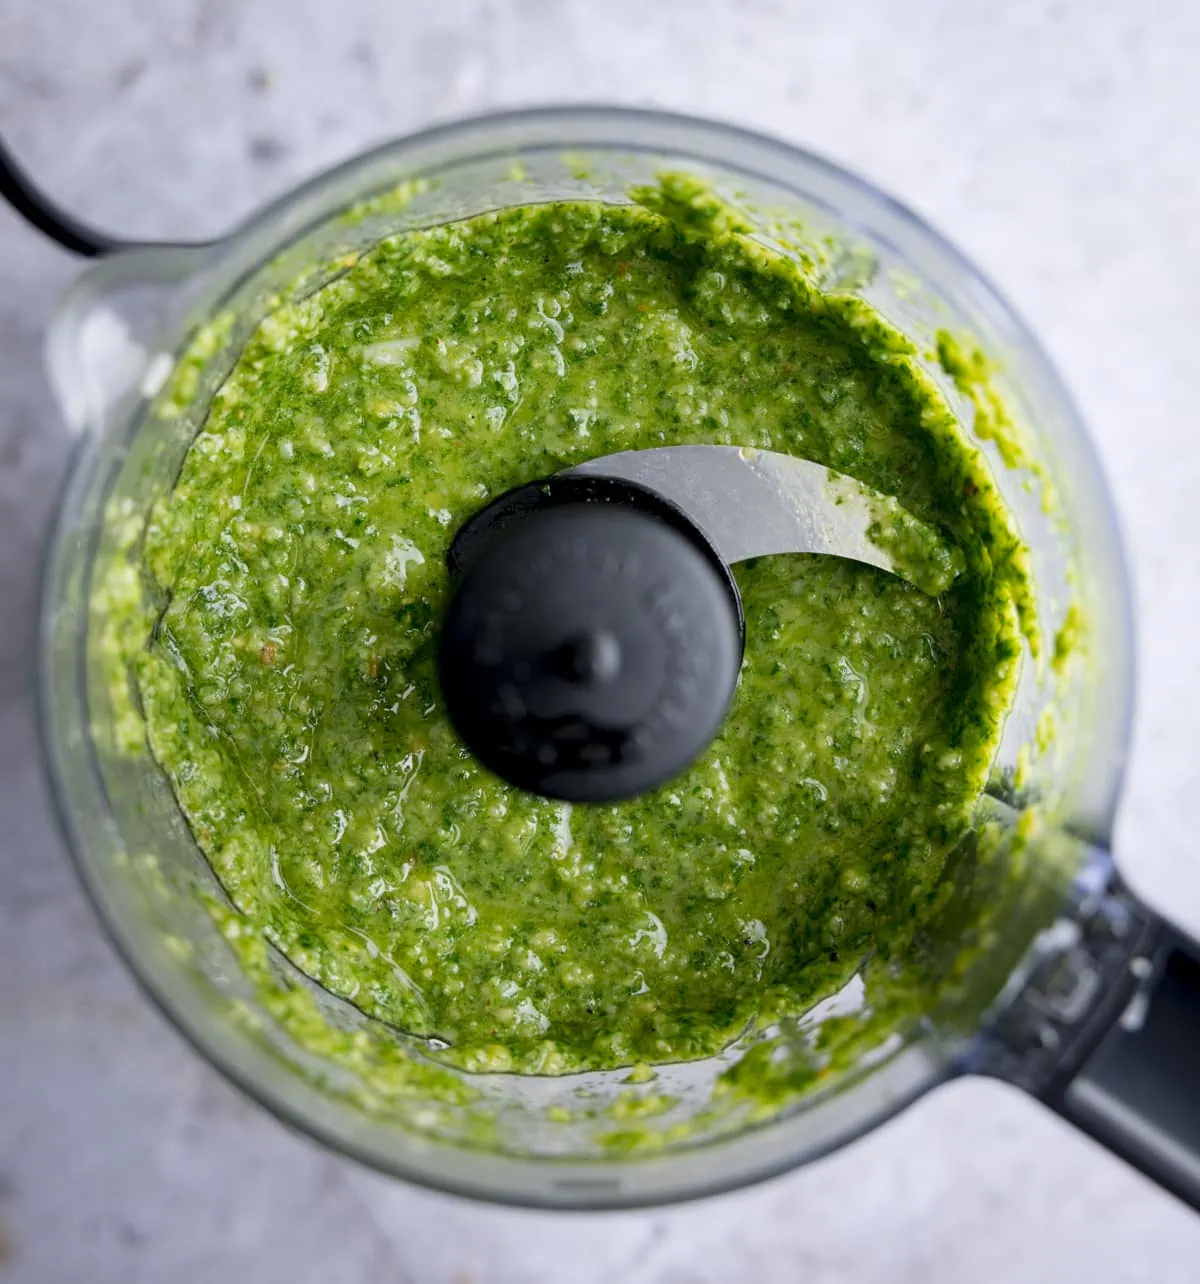 Overhead shot of homemade pesto in a small food processor, on a light background.